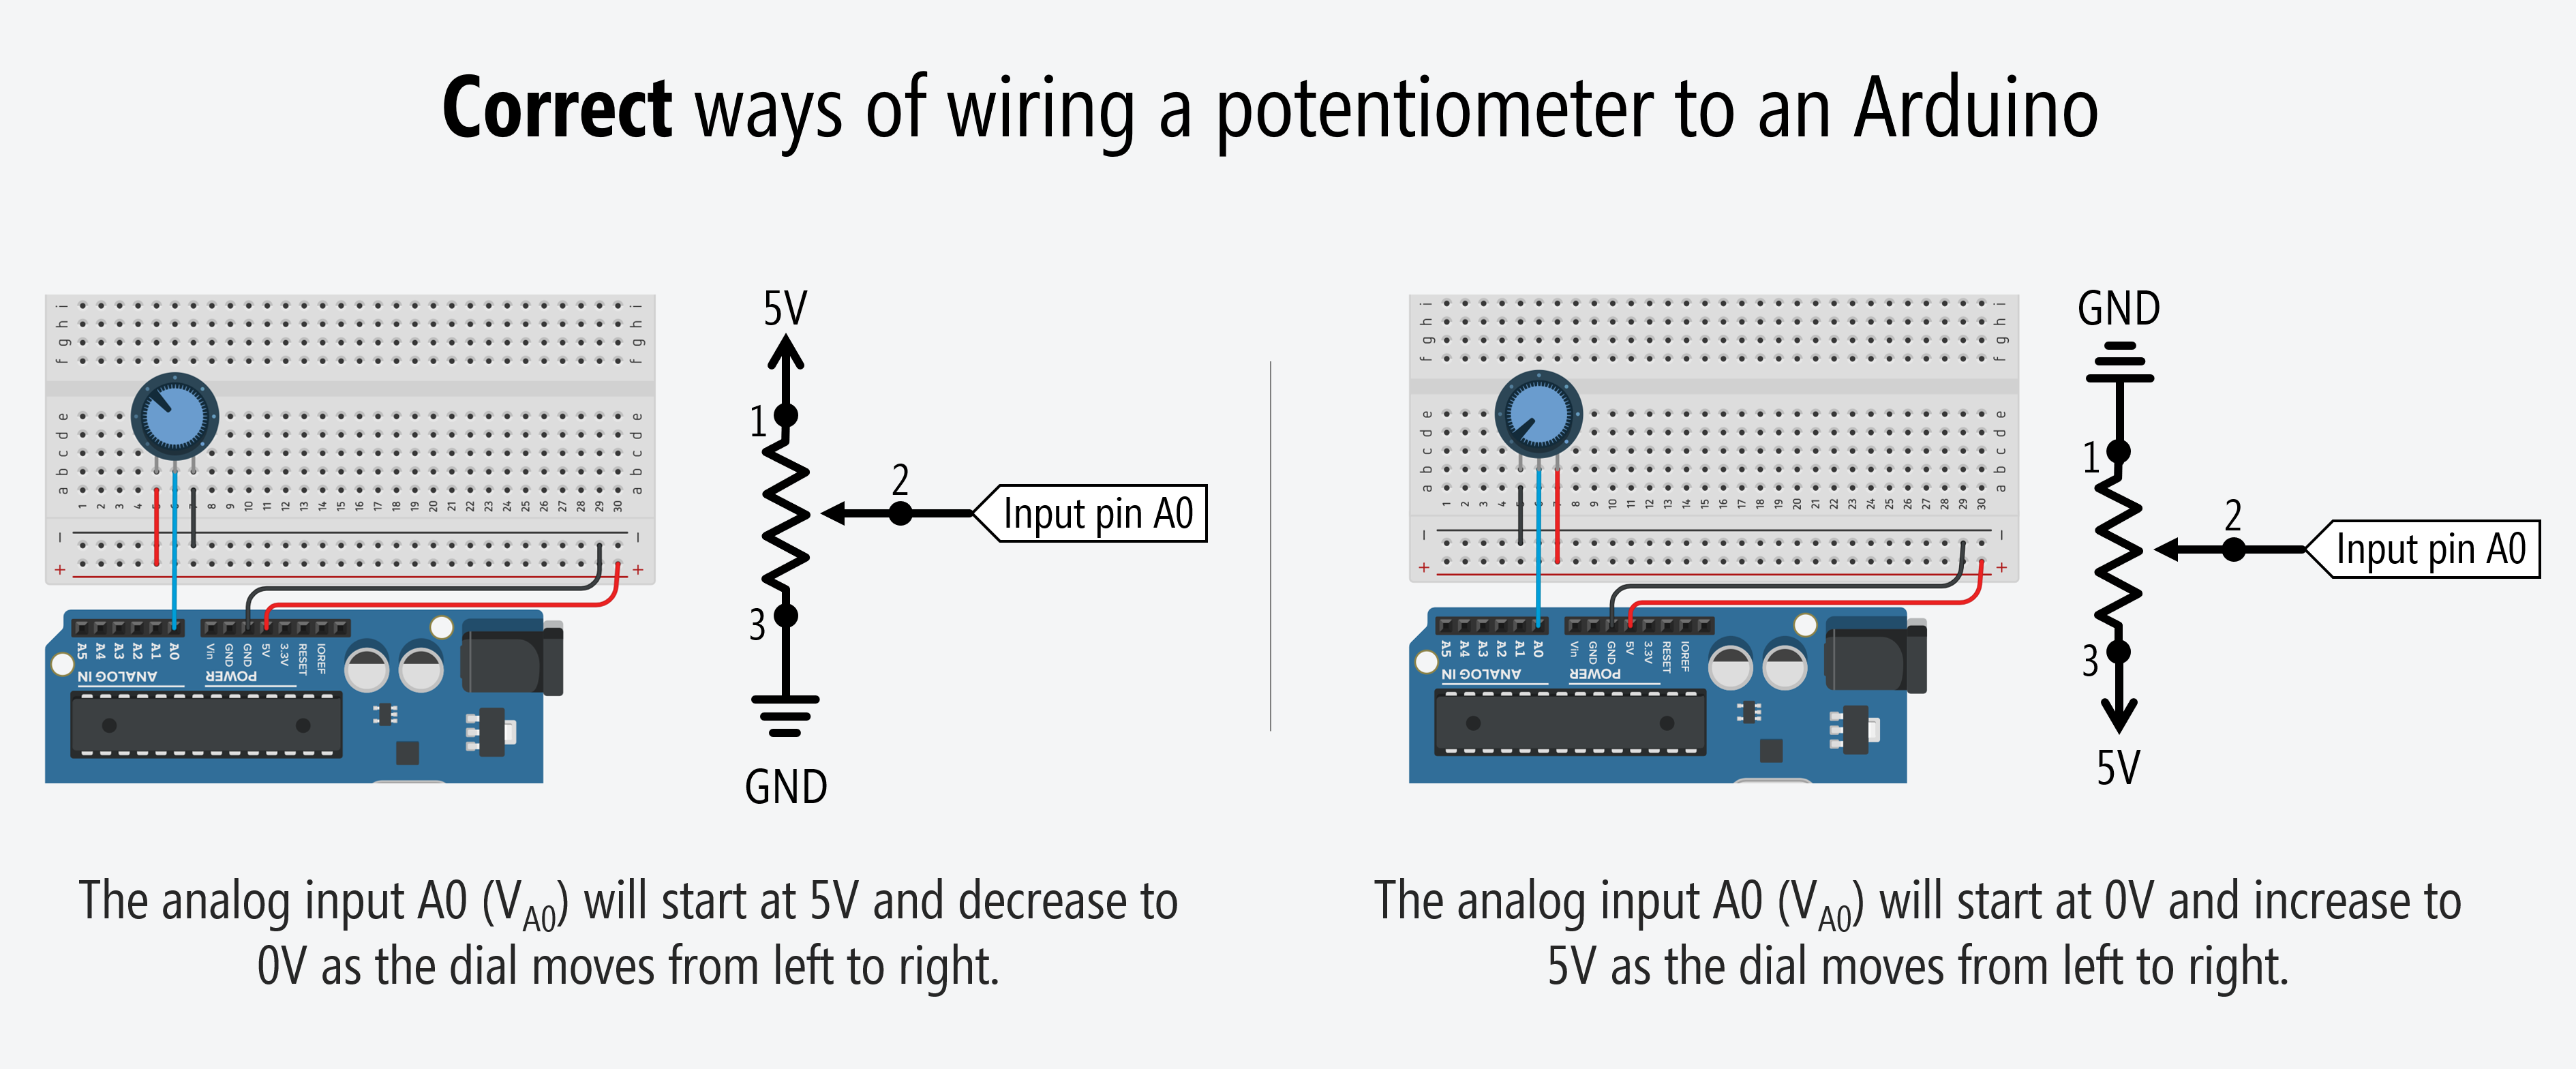 Correct ways of wiring a potentiometer to an Arduino's analog input A0.